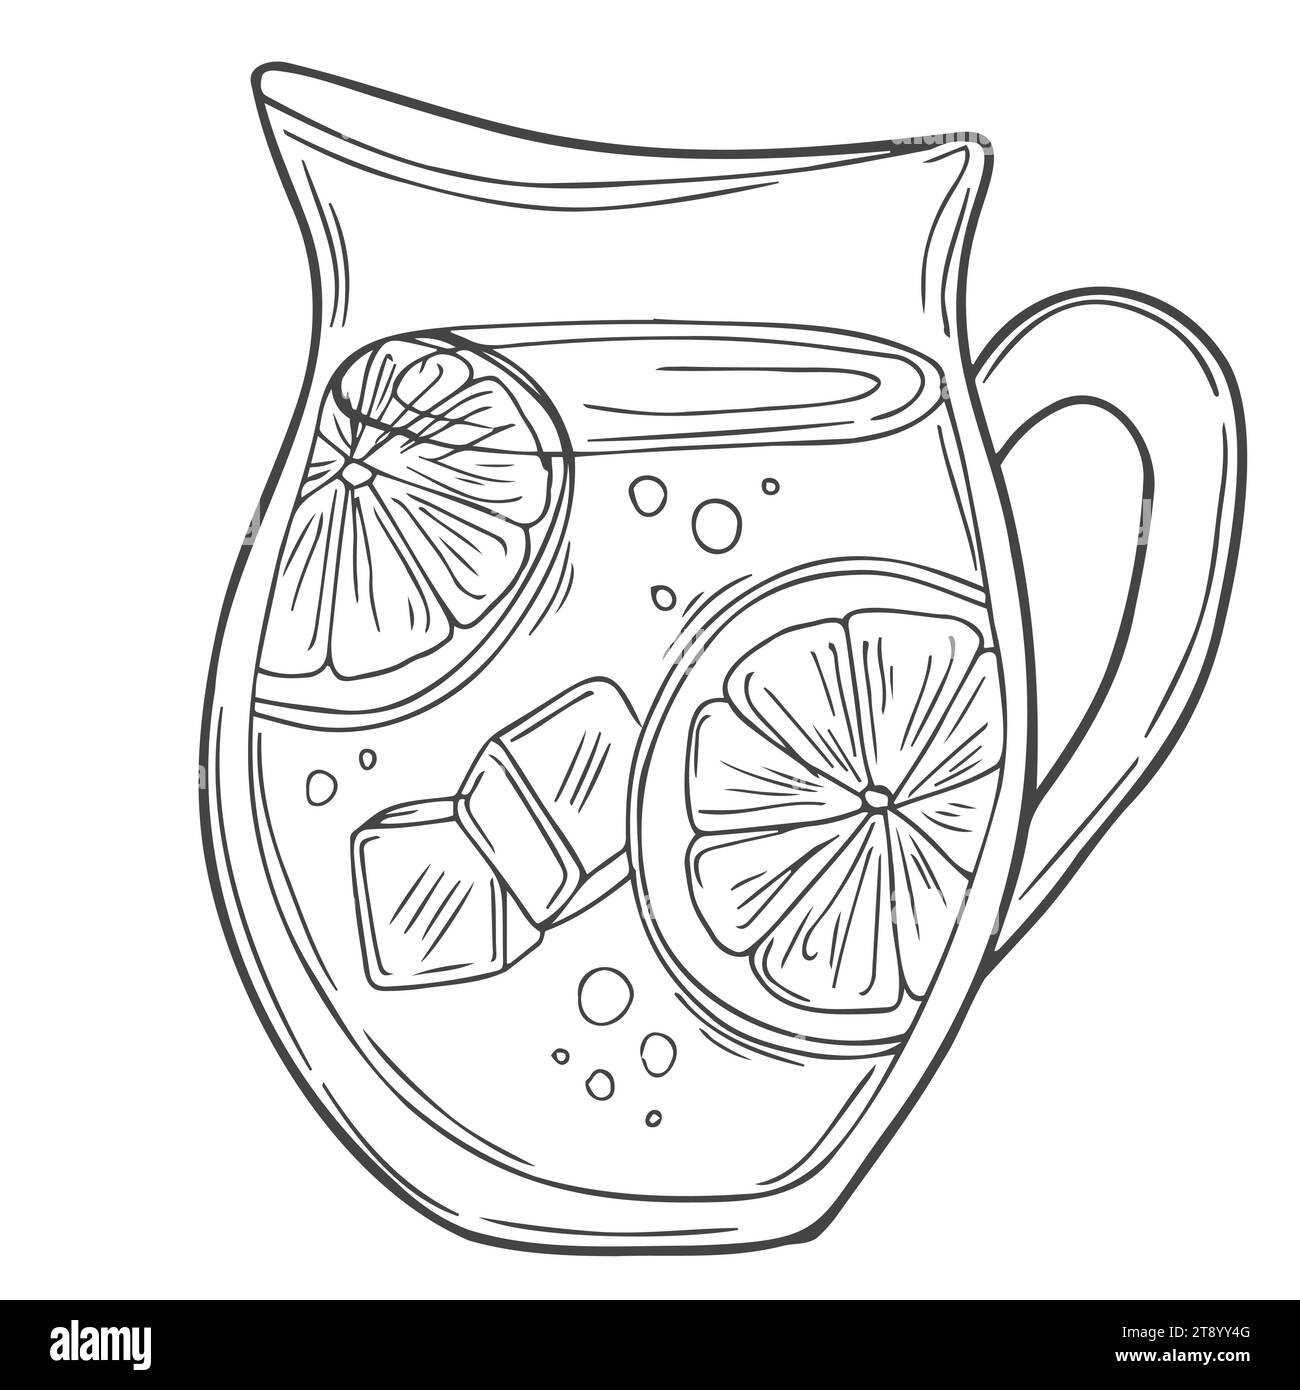 Vector illustration of a glass and a pitcher of lemonade. Stock